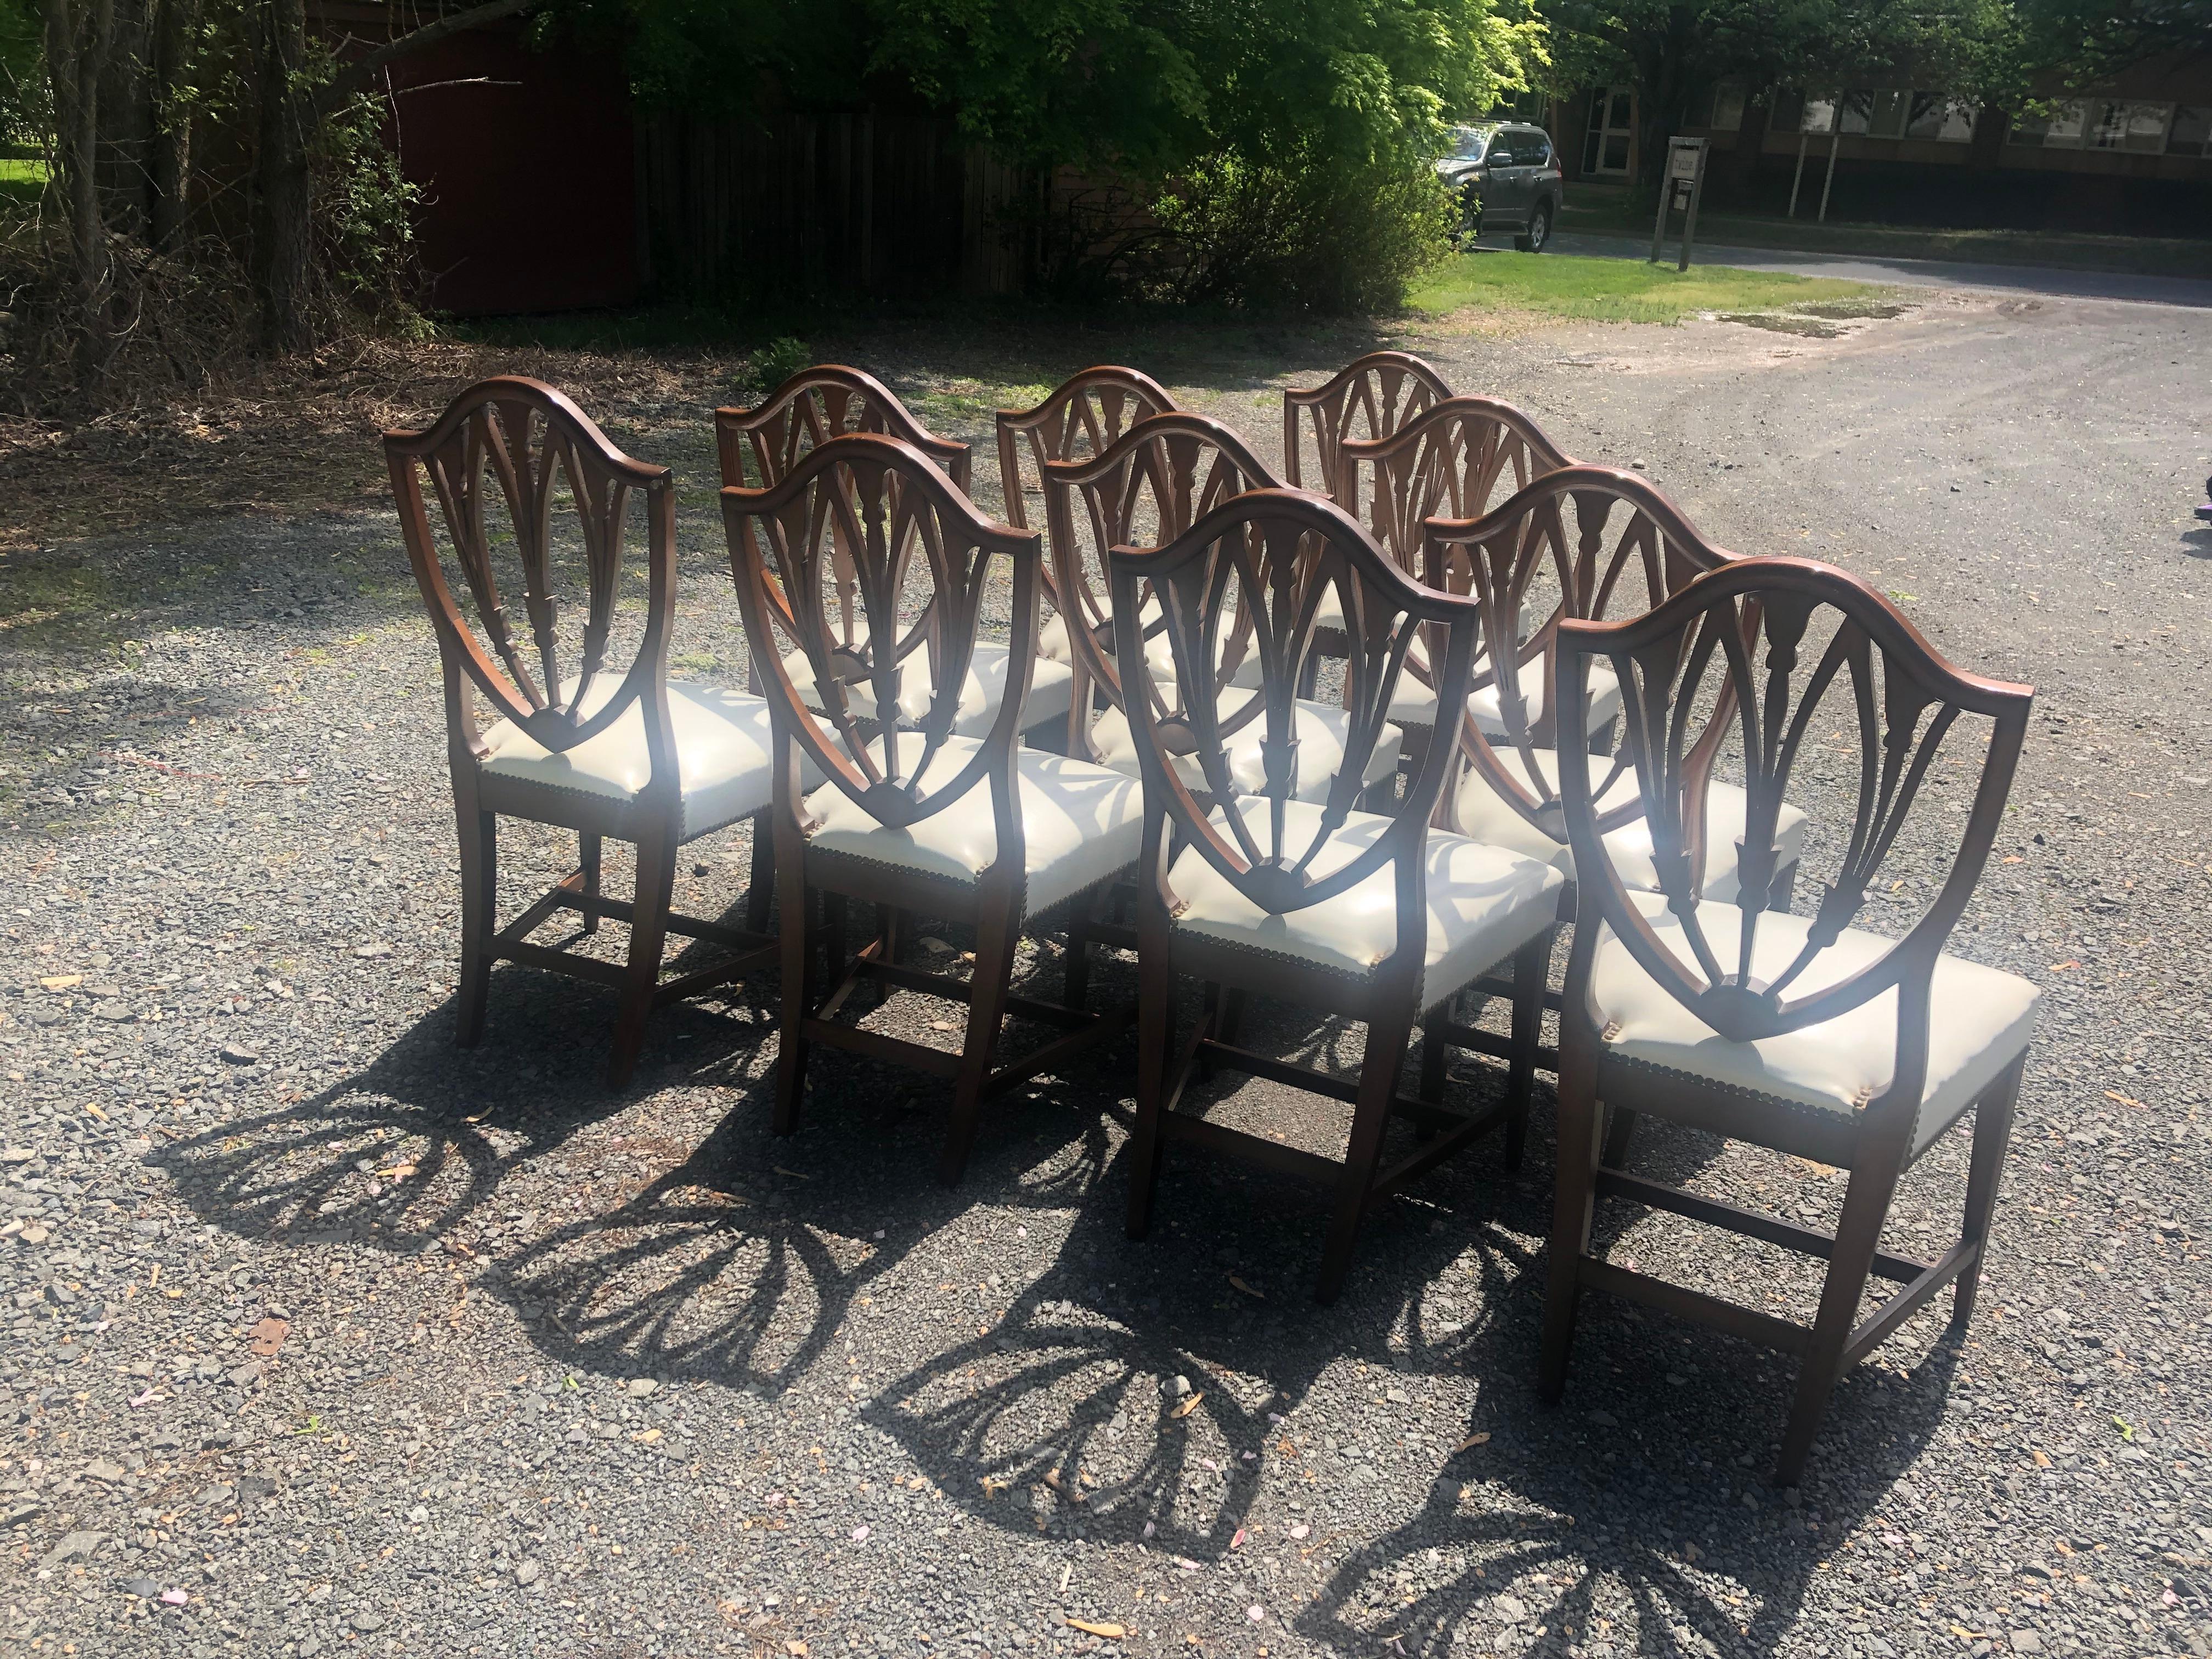 Magnificent set of 10 hand crafted mahogany Hepplewhite style side dining chairs by Virginia Craftsman having bellflower and sunburst details, shield backs, tapered legs, and glamorous white leather seats with brass nailheads.